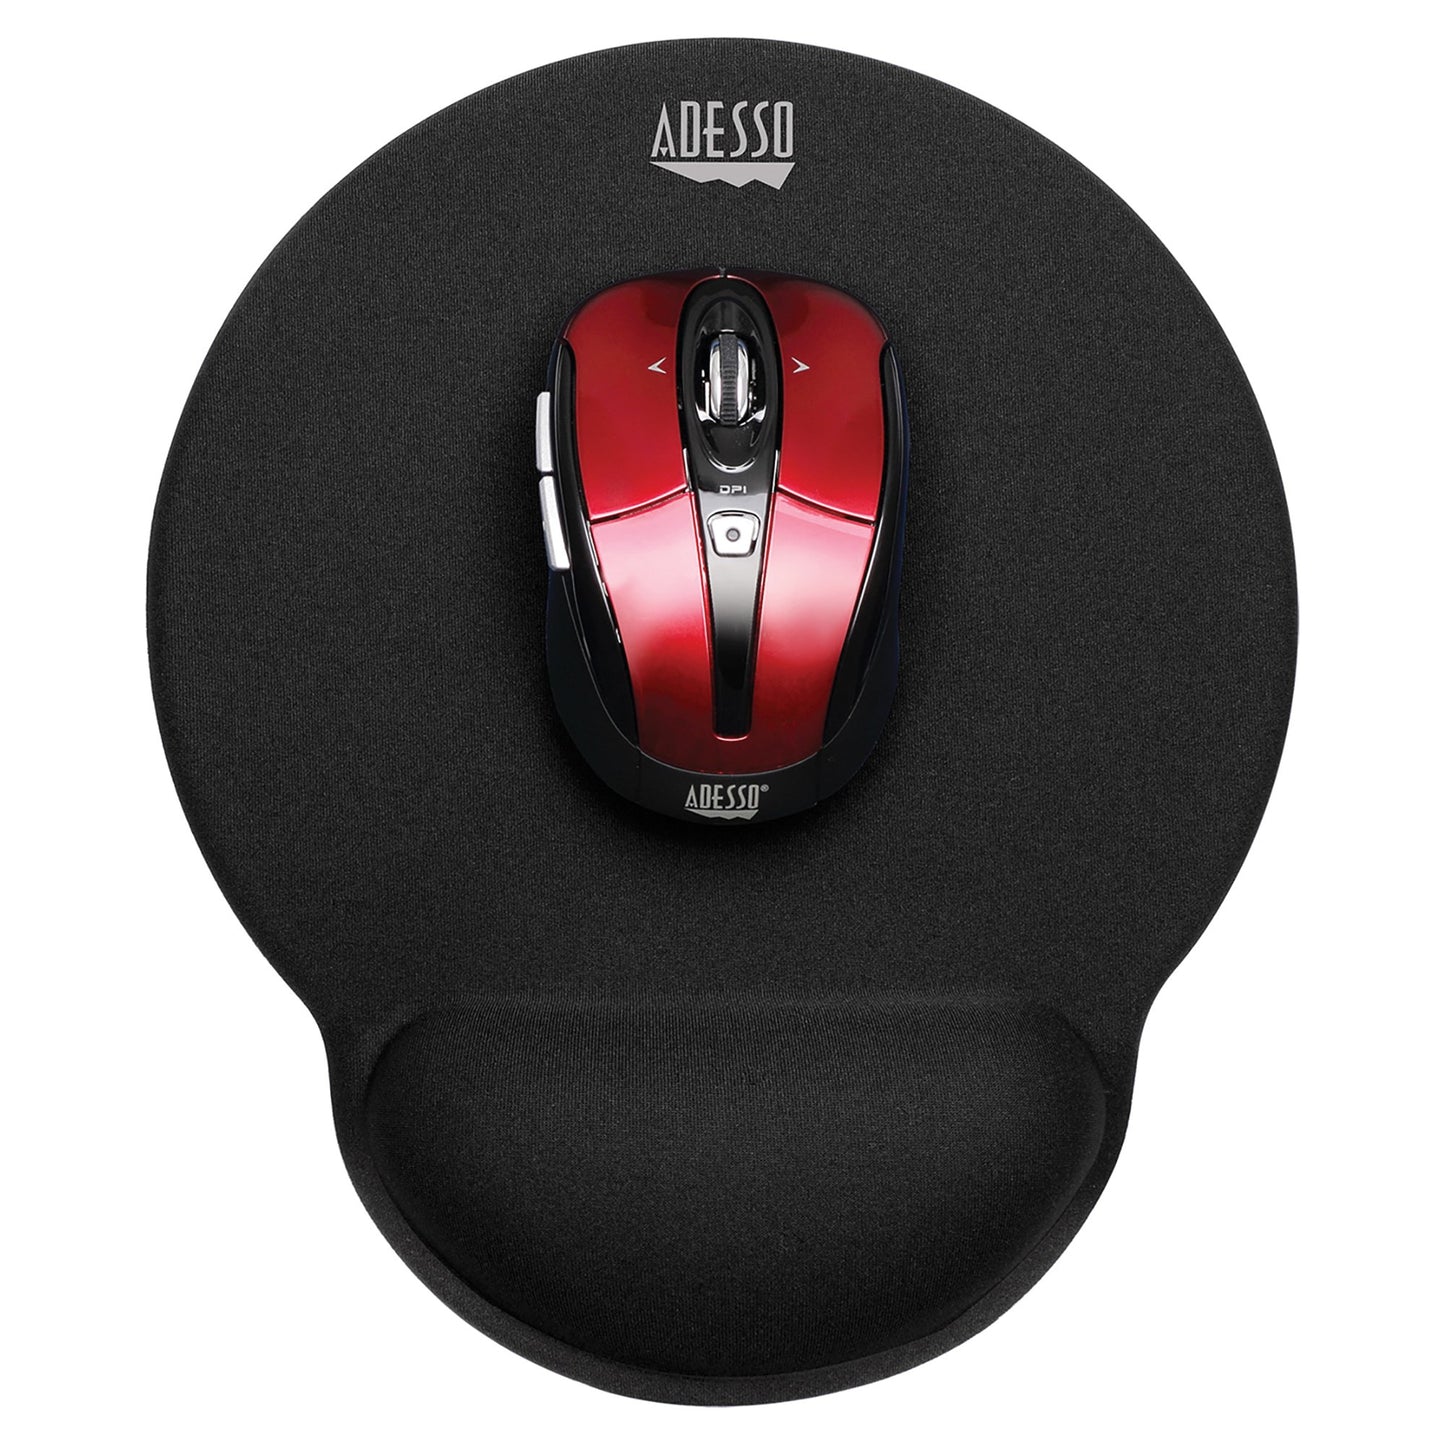 Adesso TRUFORM P200 TRUFORM P200 Mouse Pad with Memory Foam Wrist Support